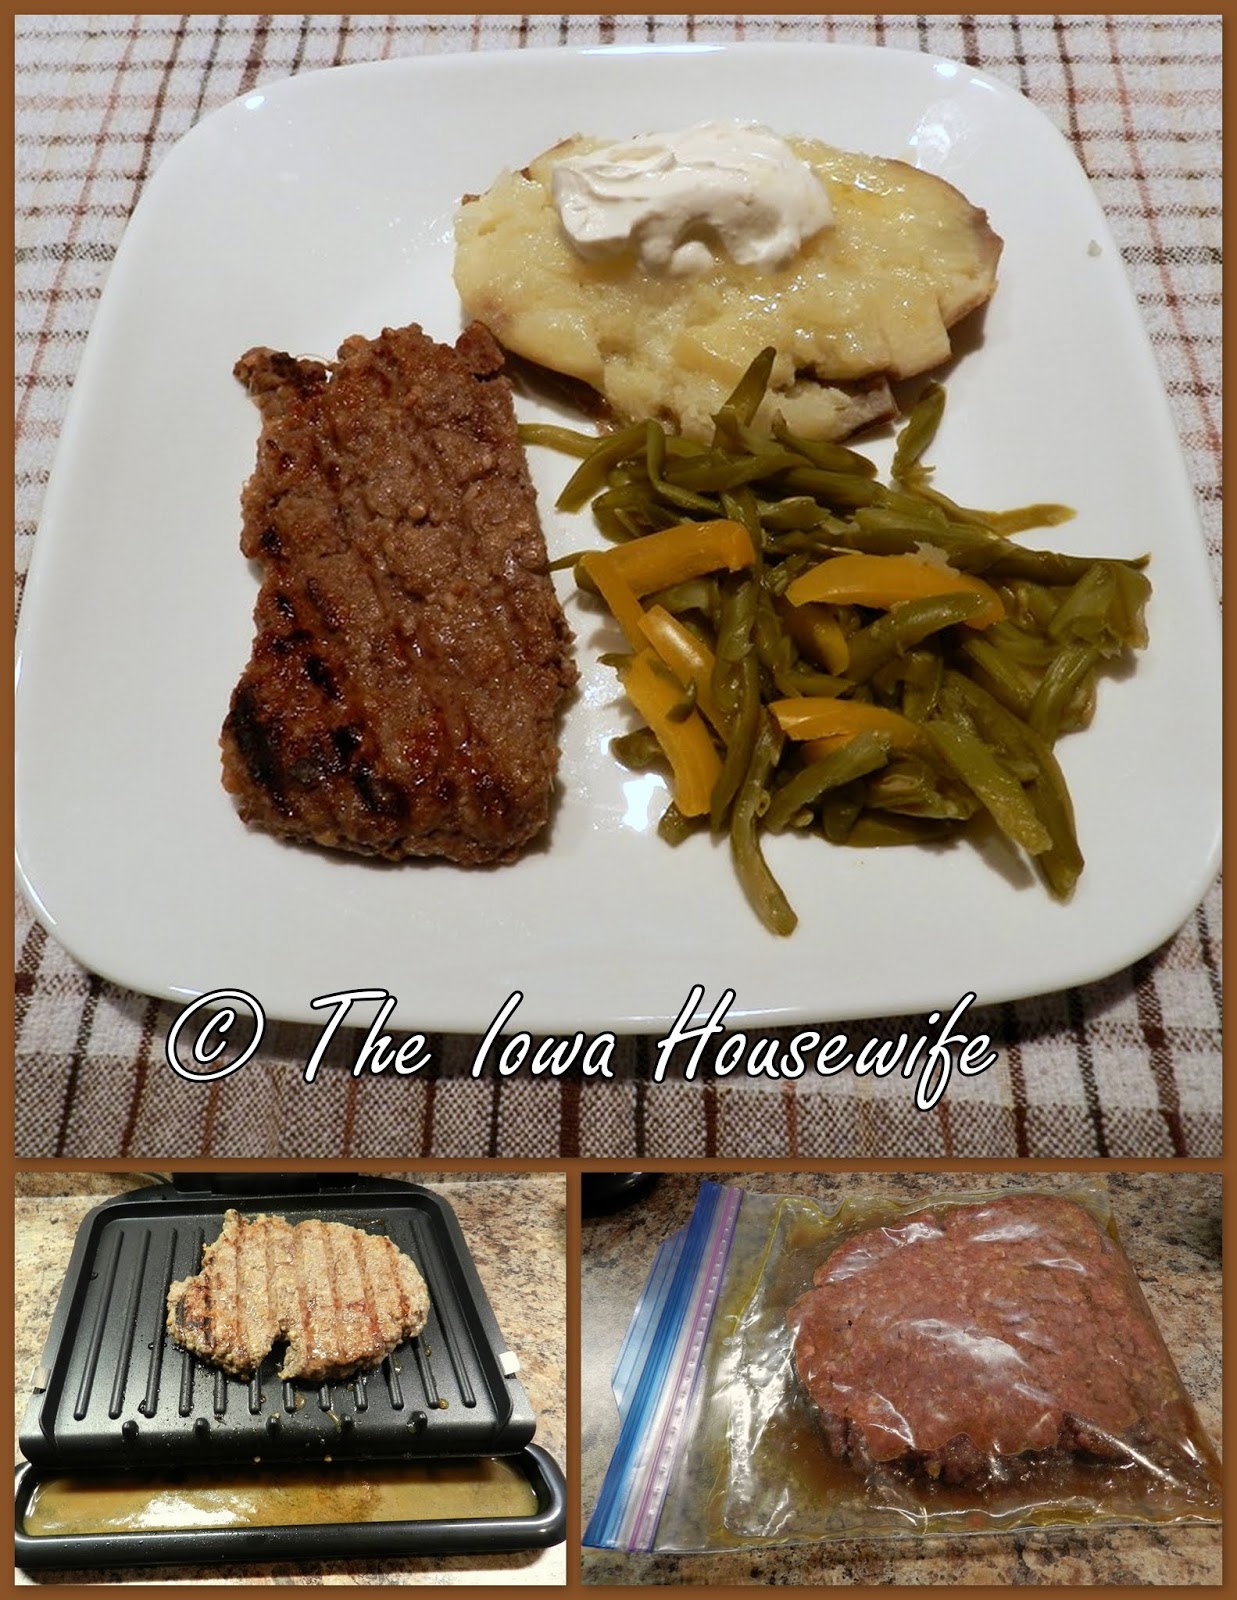 The Iowa Housewife: Grilled Minute Steaks on an Indoor Grill